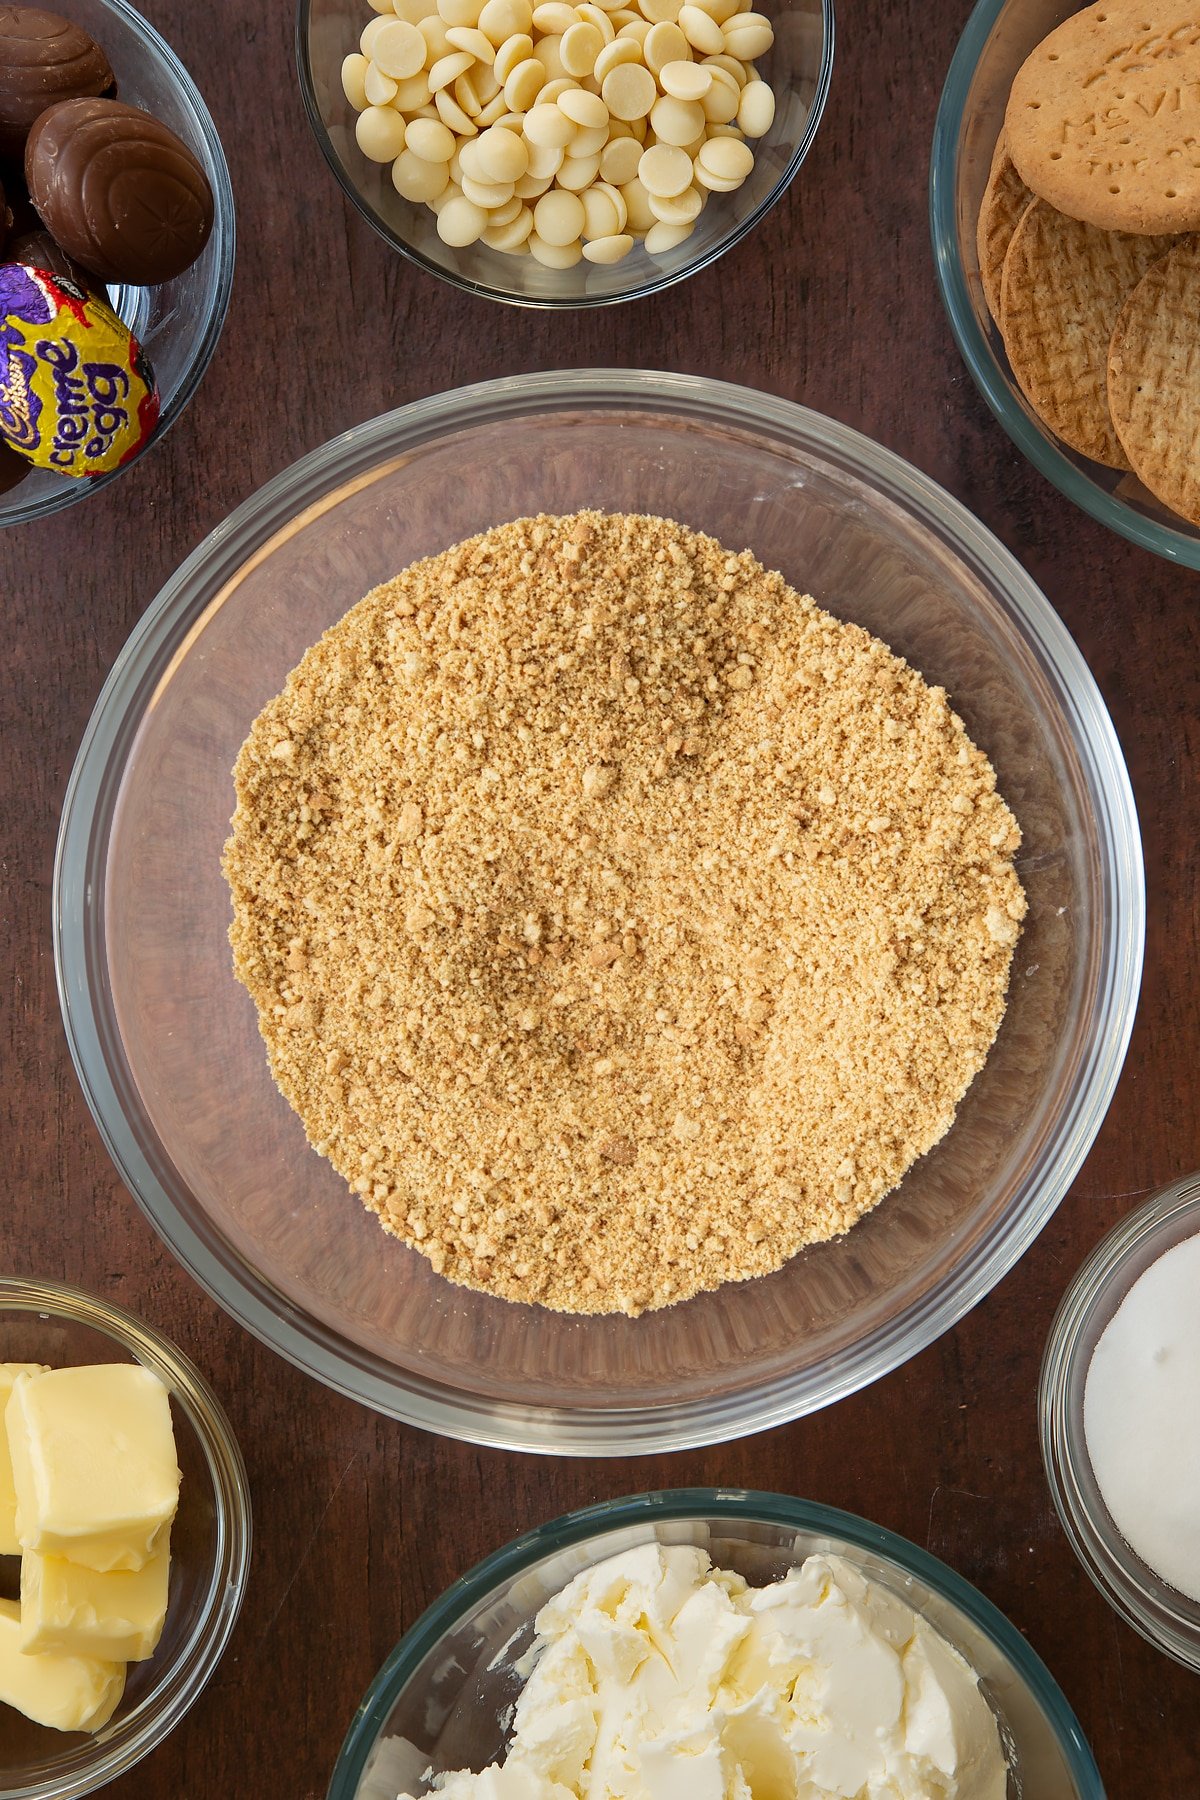 Crumbled biscuits in a mixing bowl with ingredients for the Cadbury Creme Egg cheesecake on the side.